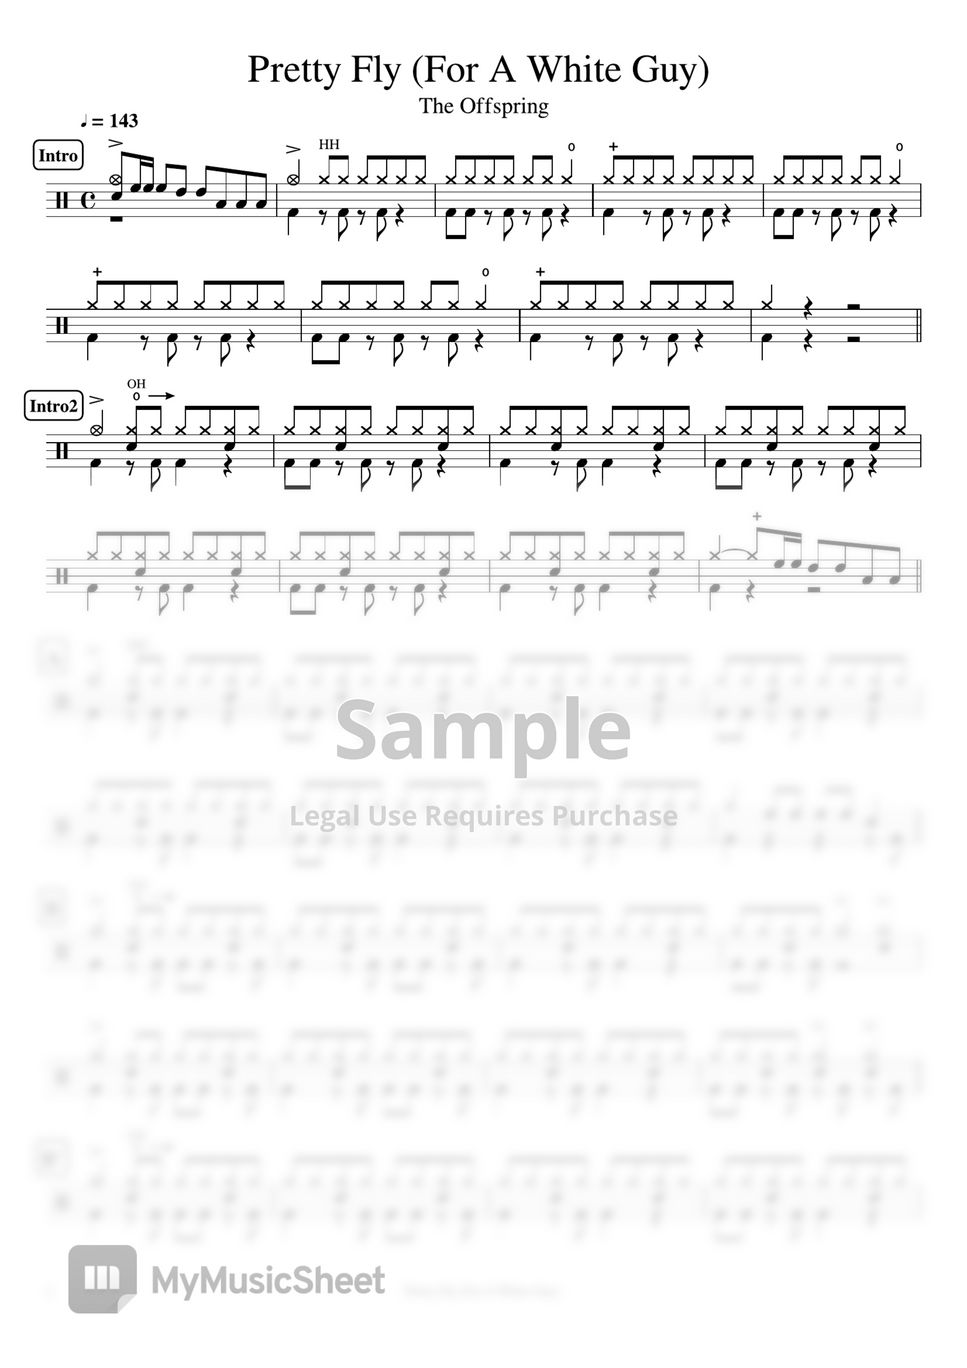 The Offspring - Pretty Fly (For A White Guy) by Cookai's J-pop Drum sheet music!!!